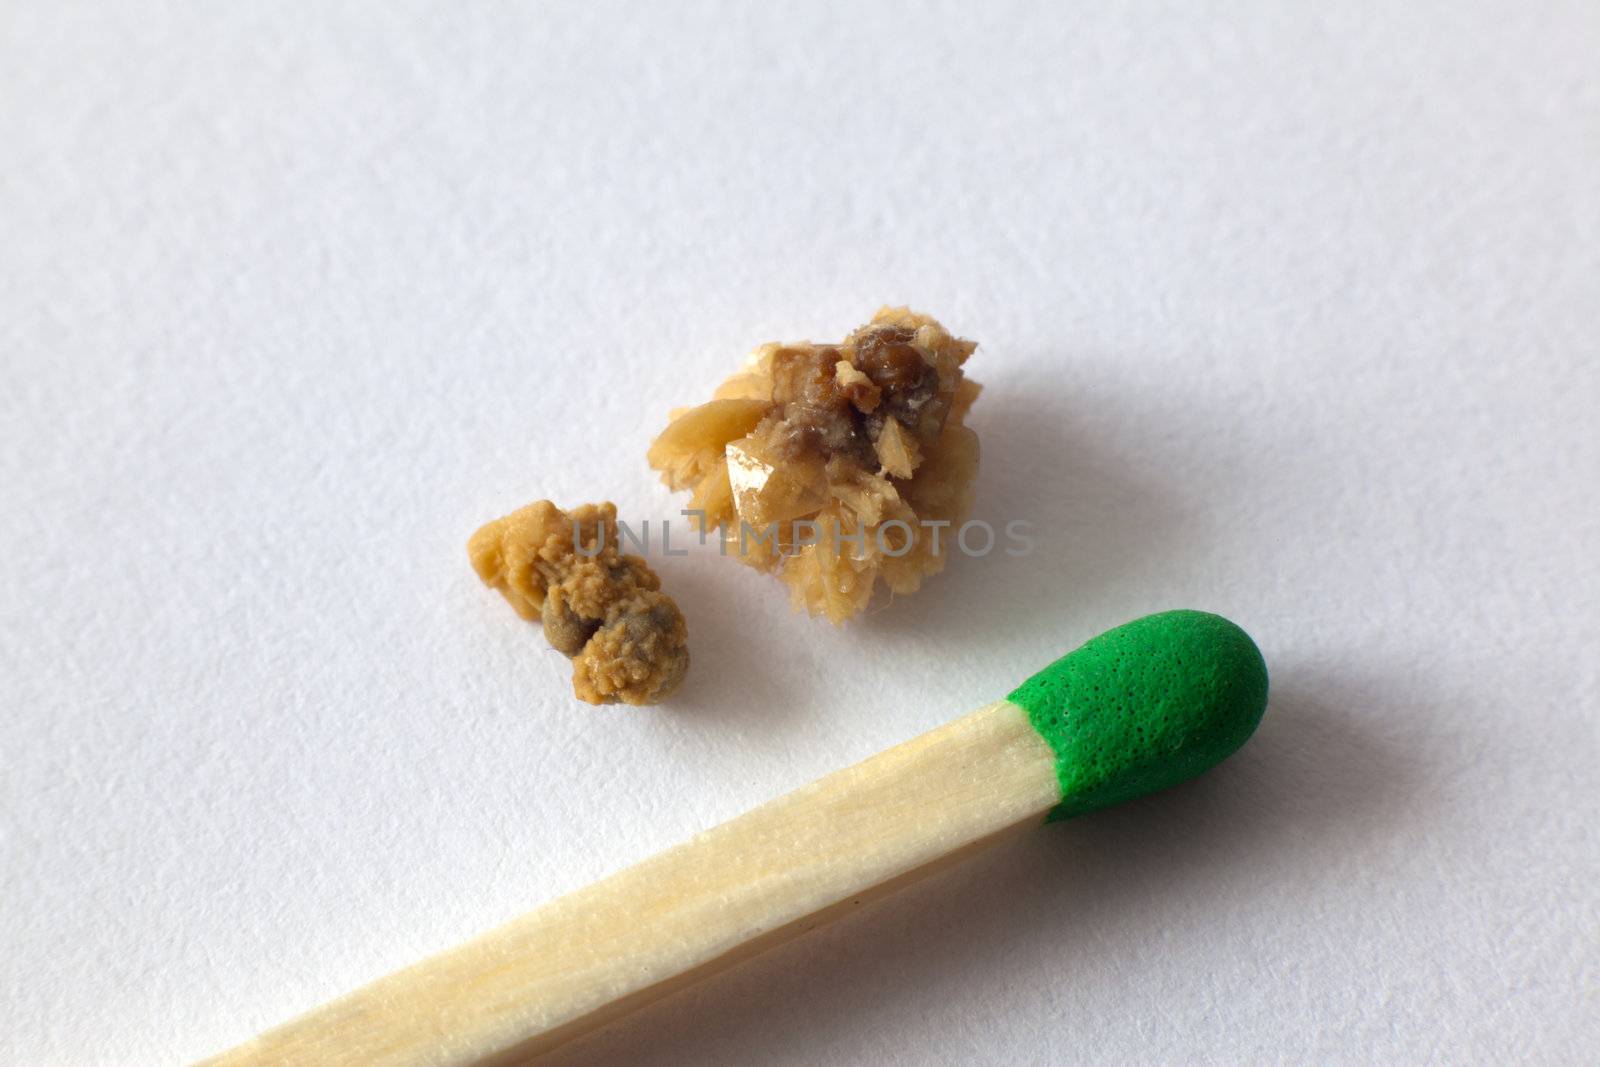 Kidney stones compared to match on macro shot
